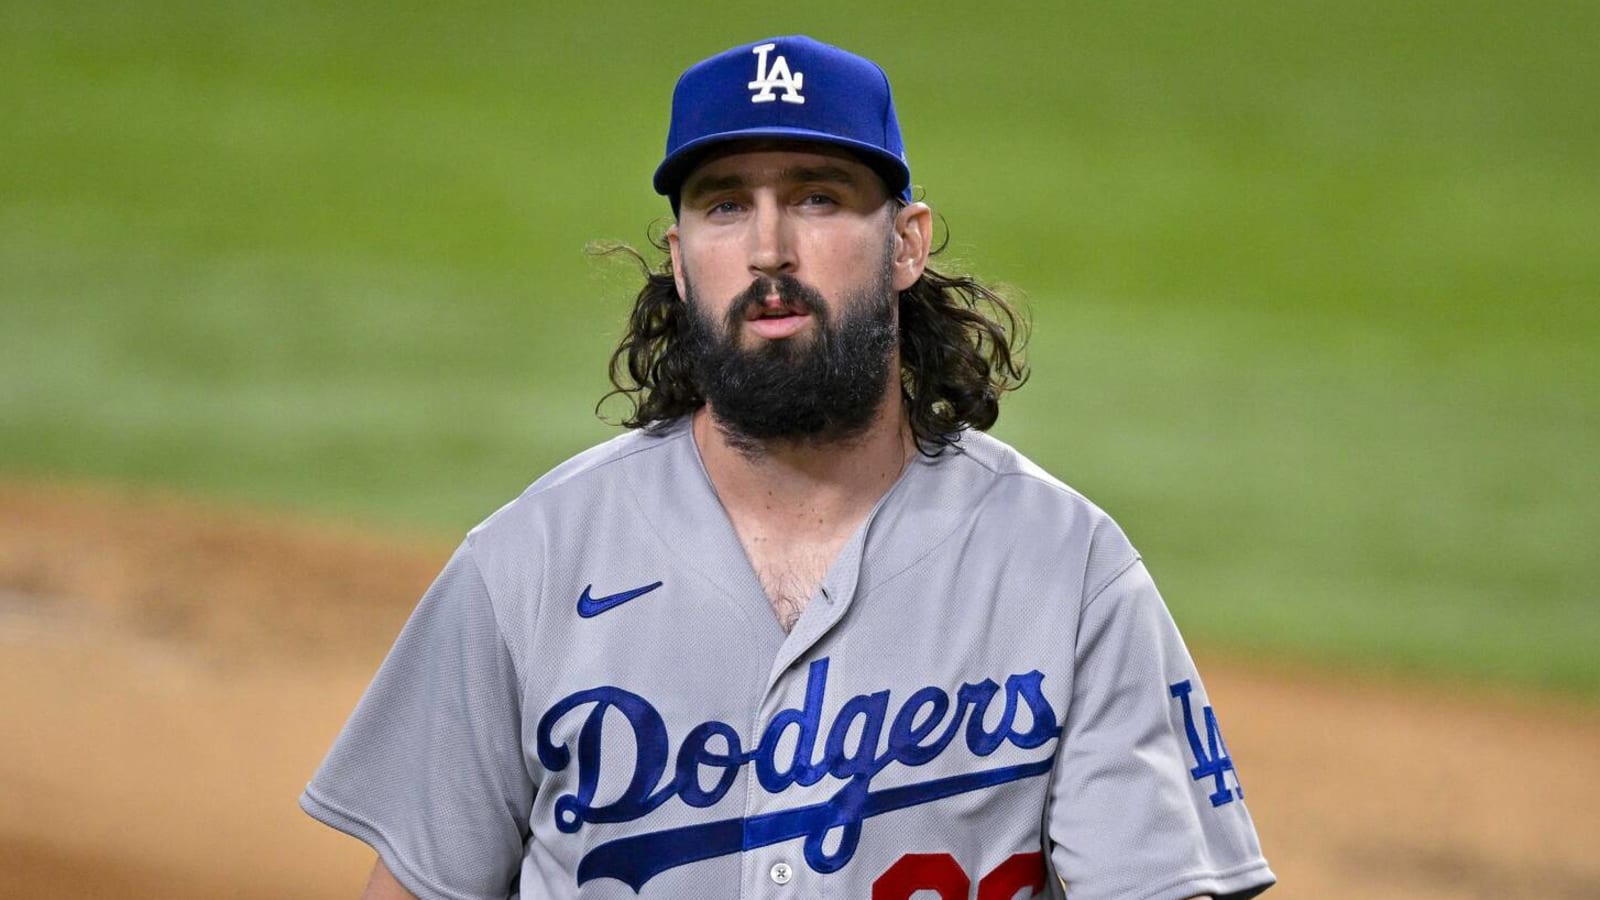 Dodgers lose another starting pitcher to season-ending injury